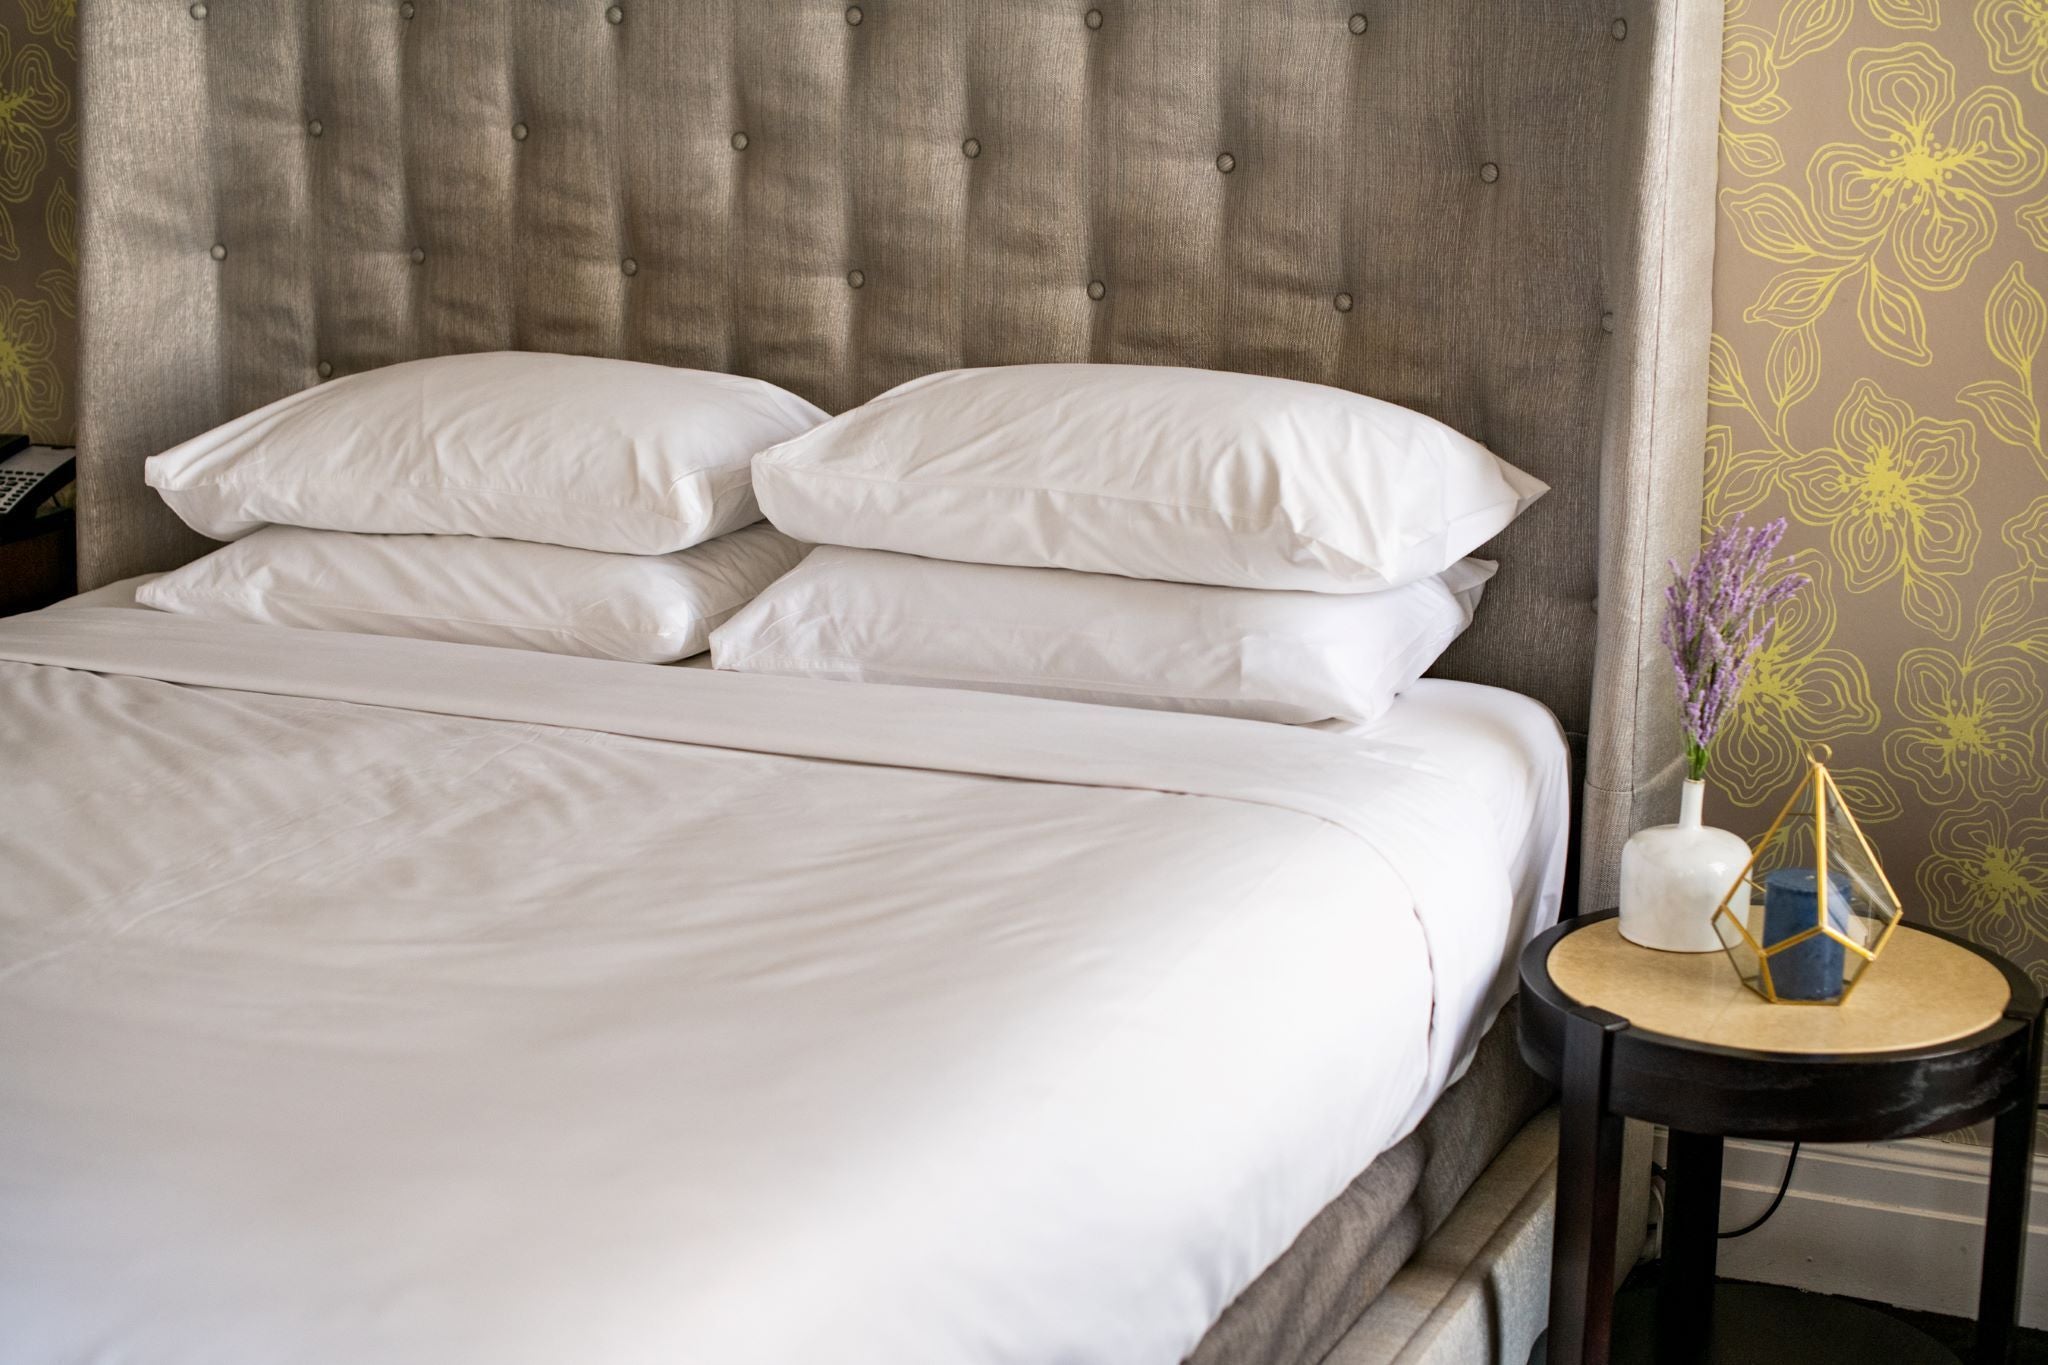 Four t200 white pillowcases on a hotel bed